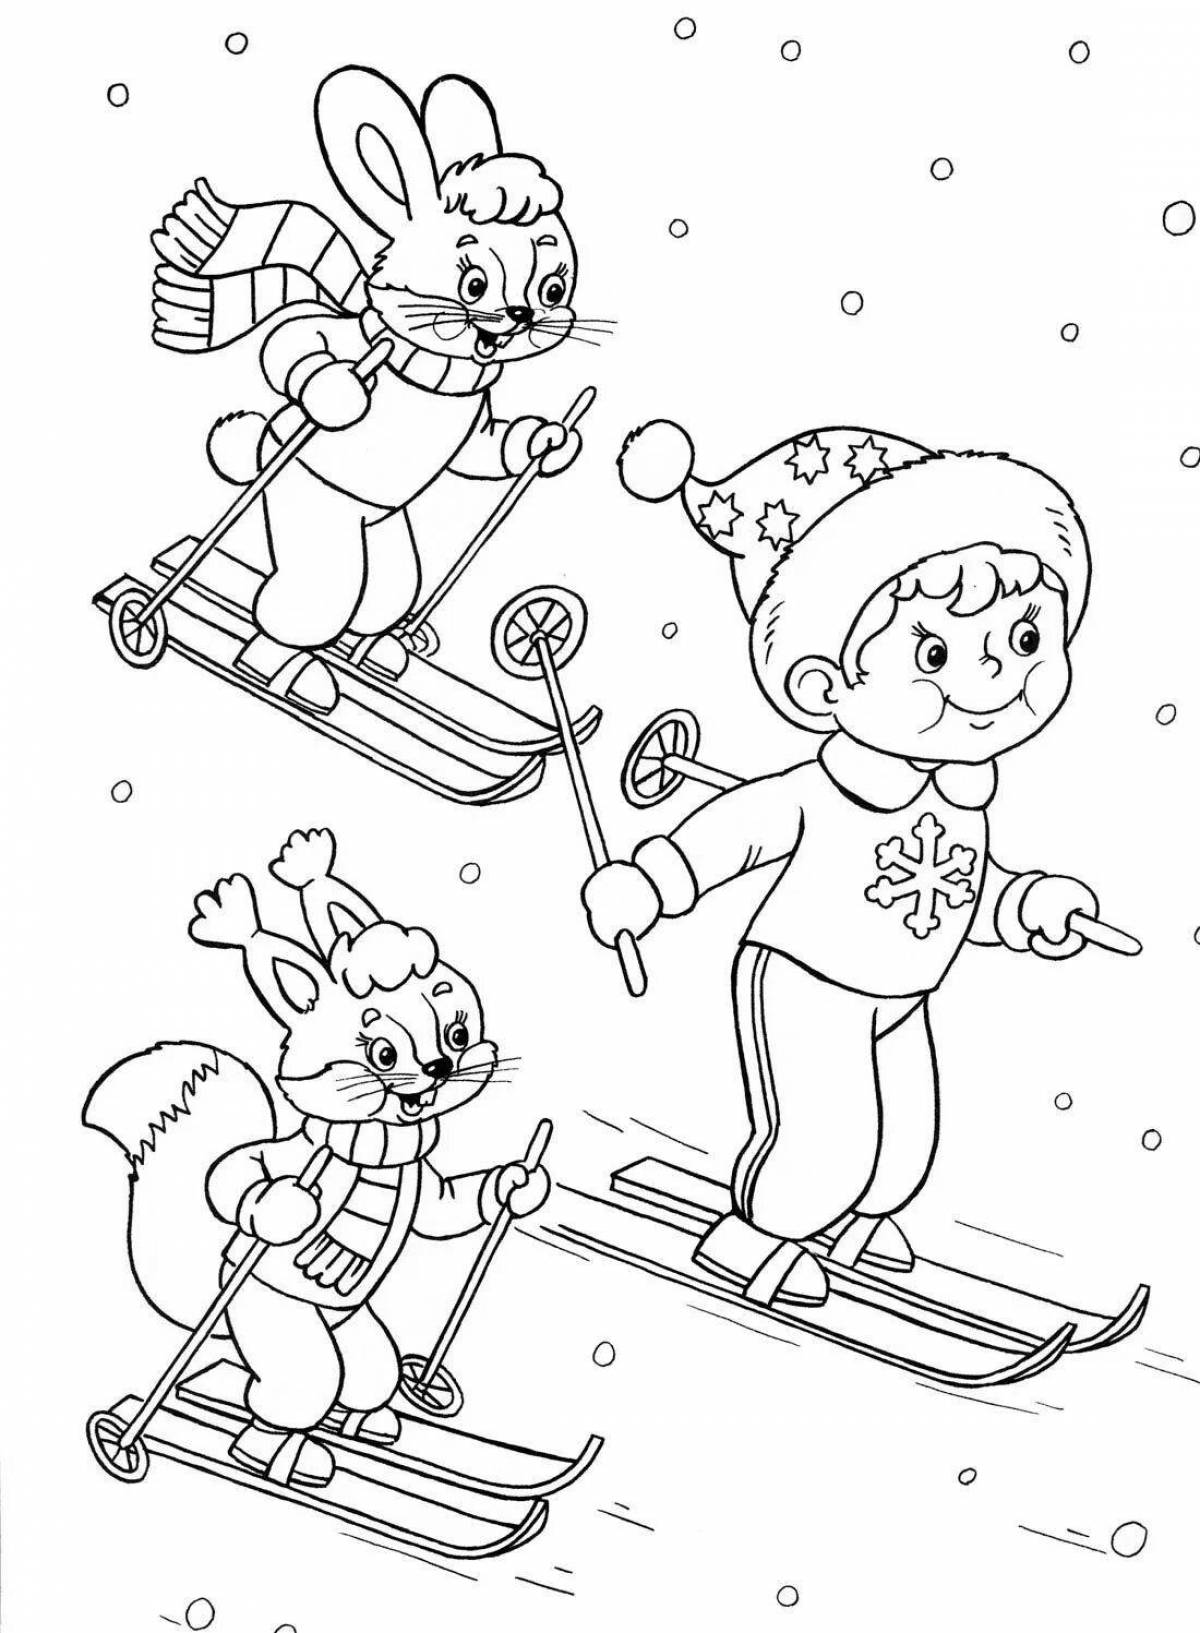 Amazing winter sports coloring page for kindergarten